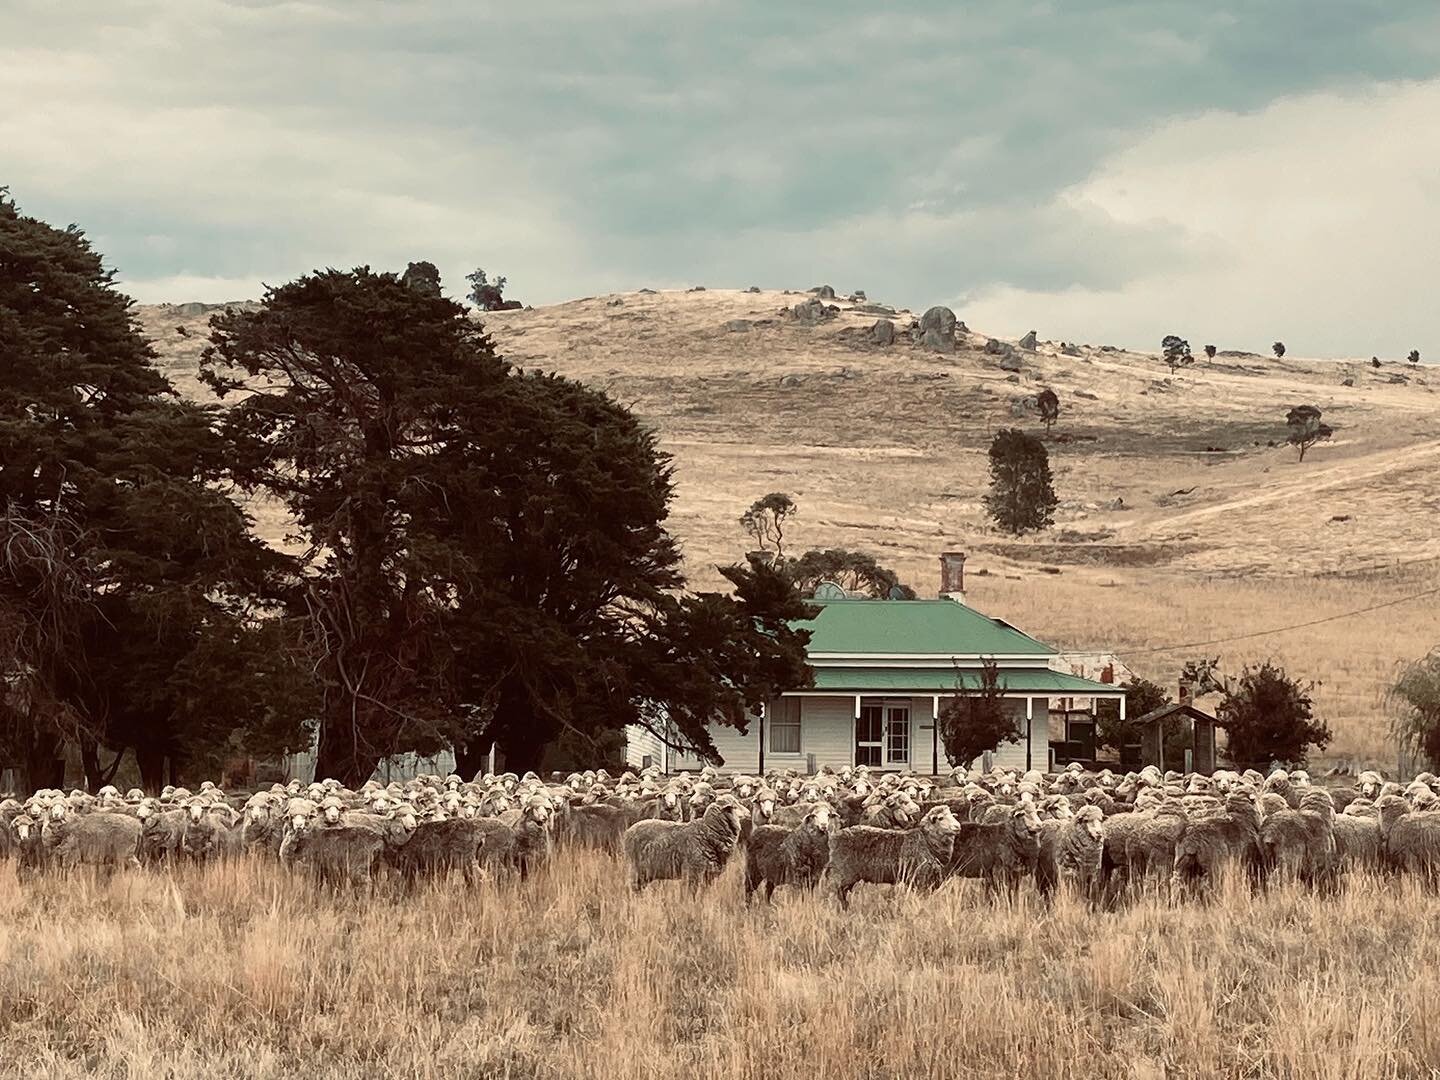 Sometimes you just have to stop and admire! Healthy sheep on healthy land.. #merino #grassfed #nature #regenerativeagriculture

Photo credit: Bill&rsquo;s brother @sidoniabeef for the photo 👏🏼